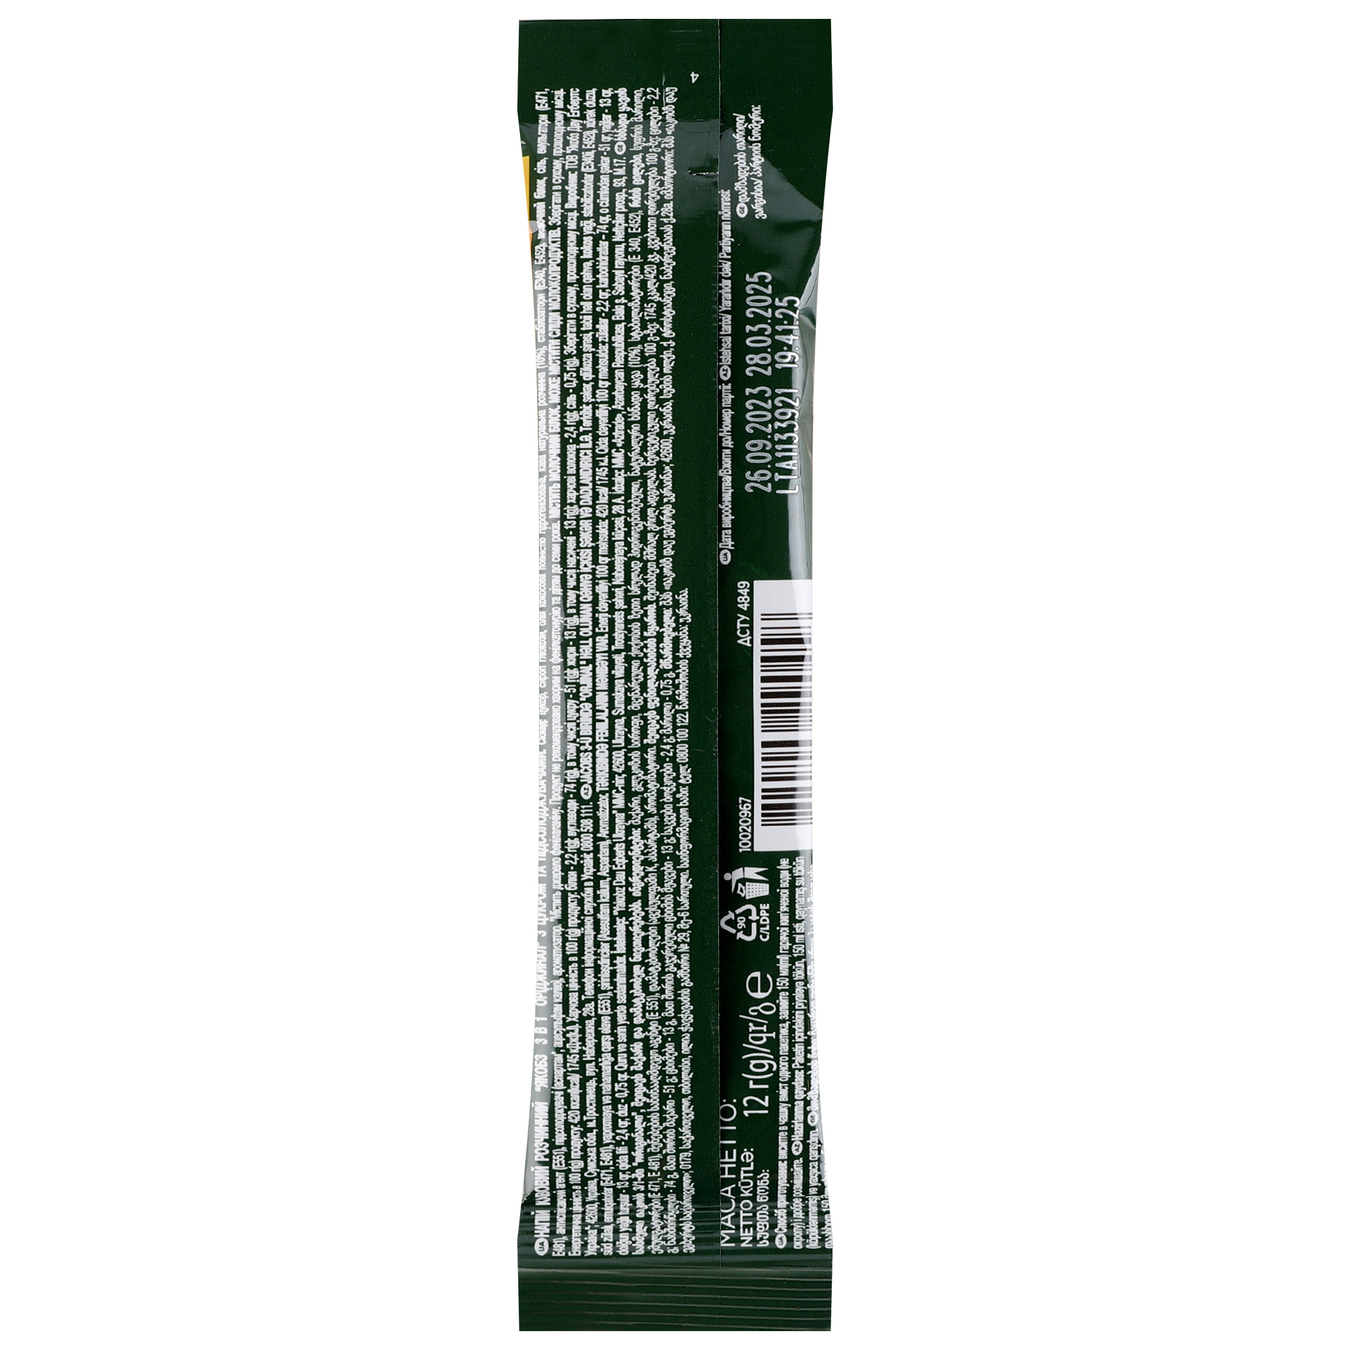 Jacobs Original 3in1 instant coffee drink stick 12g 2